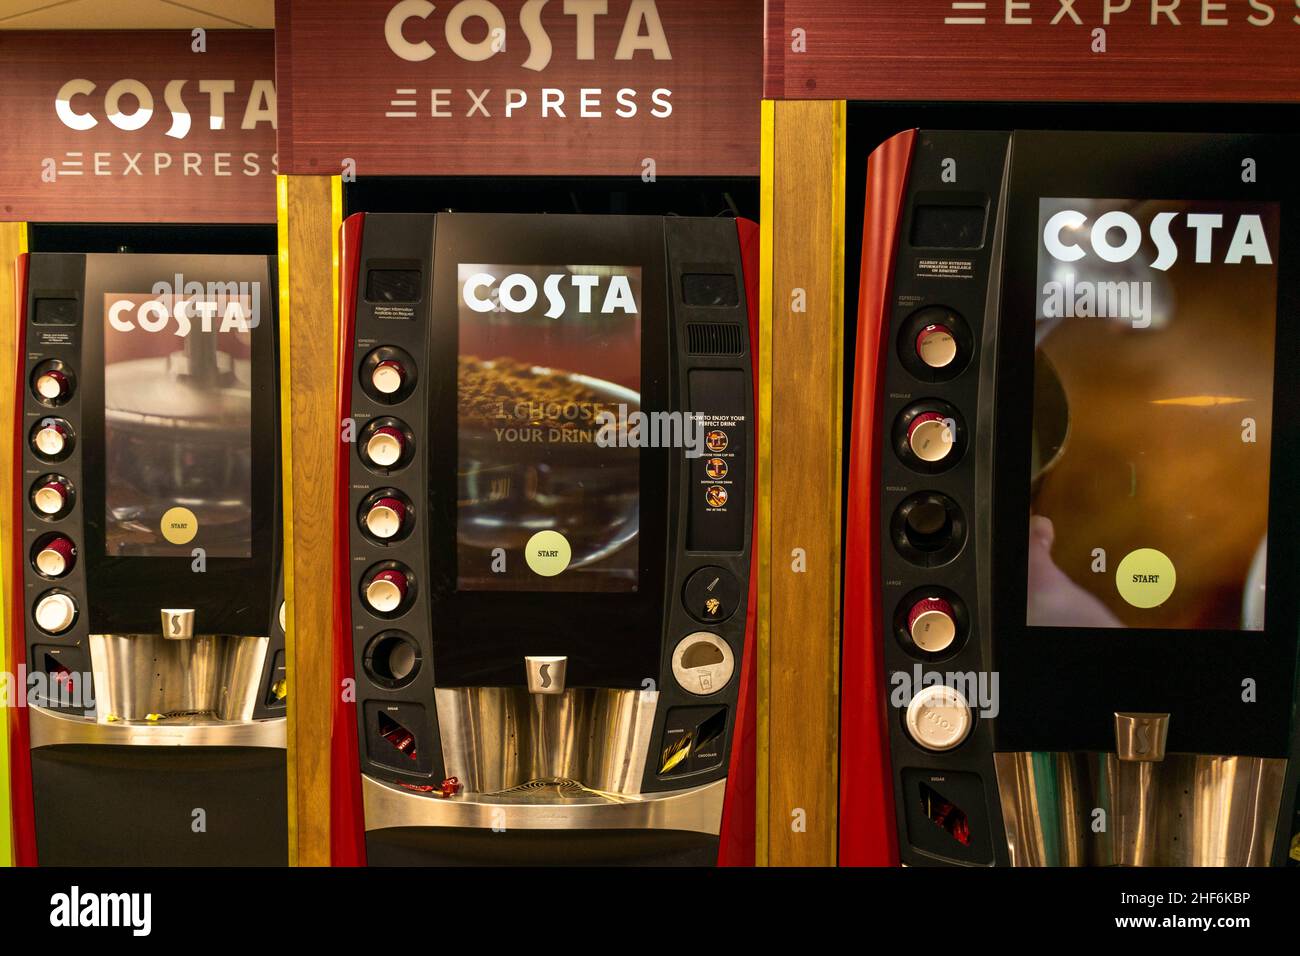 Durham, UK - 23rd August 2019: Costa Coffee Express coffee machine at a motorway service station. Motorists can self serve a hot caffeine beverage Stock Photo